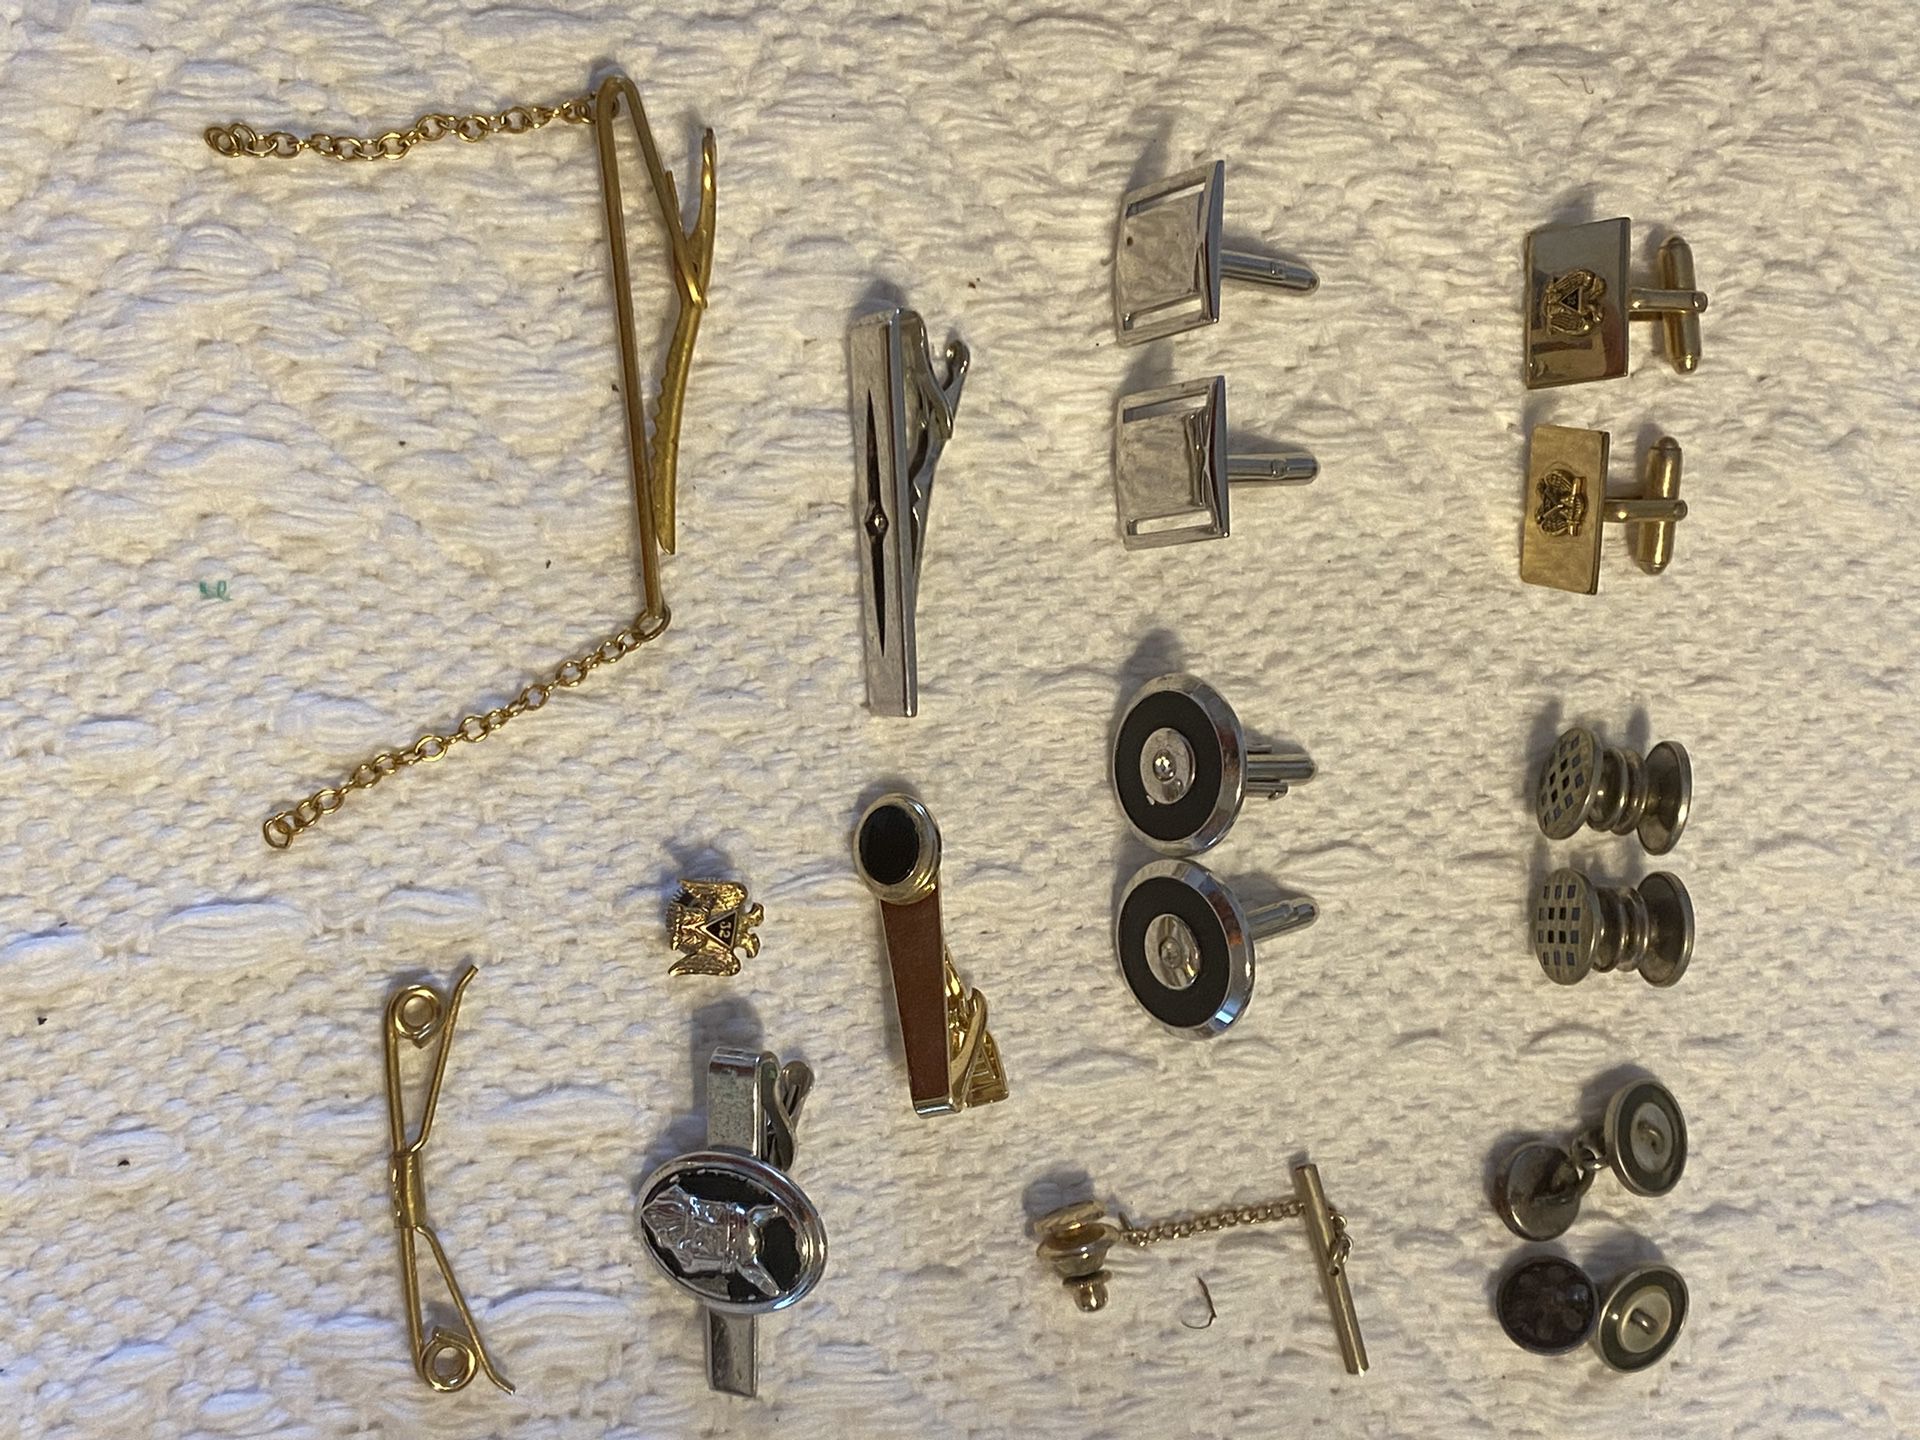 Very old cuff links and tie pins